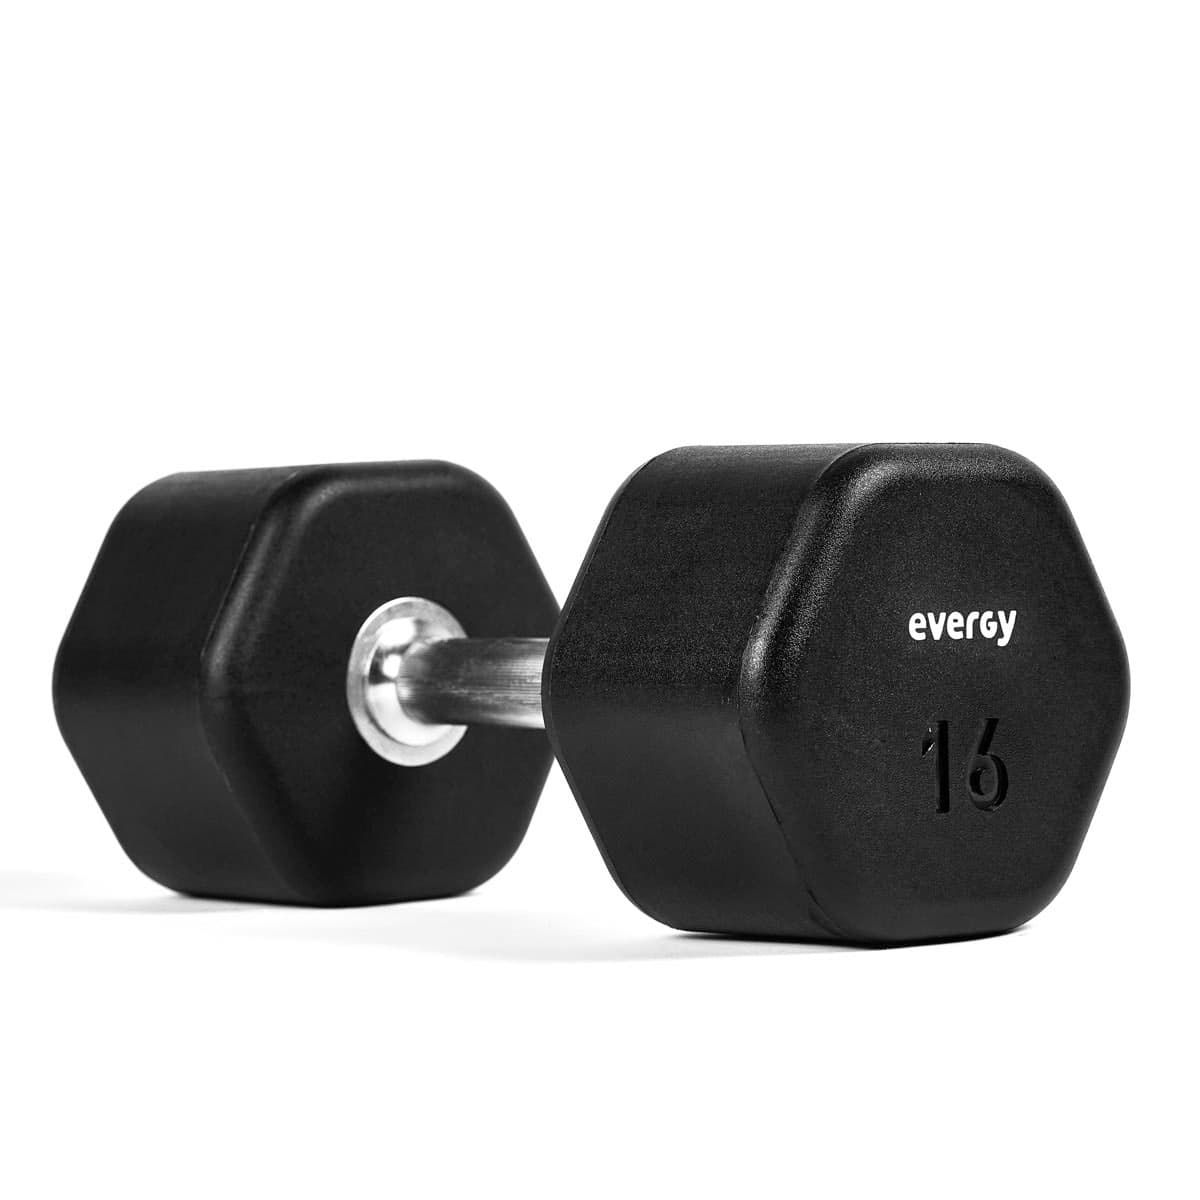 Boost your routines with our Hex Dumbbells!